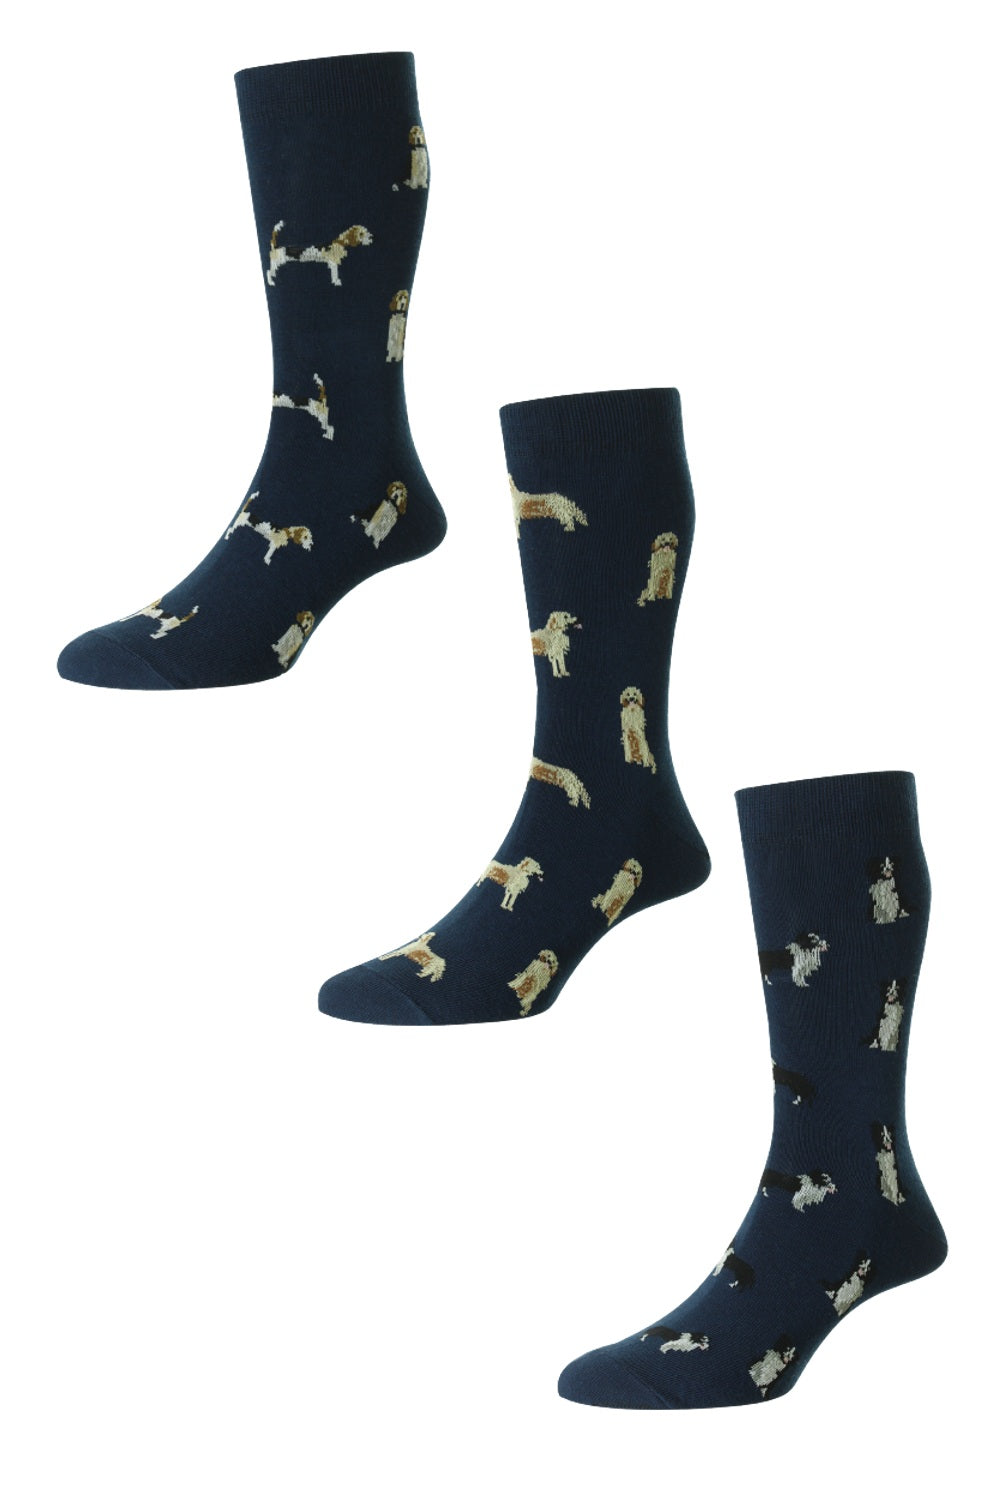 HJ Hall Dogs Rich Cotton Socks in Beagle, Retriever and Collie